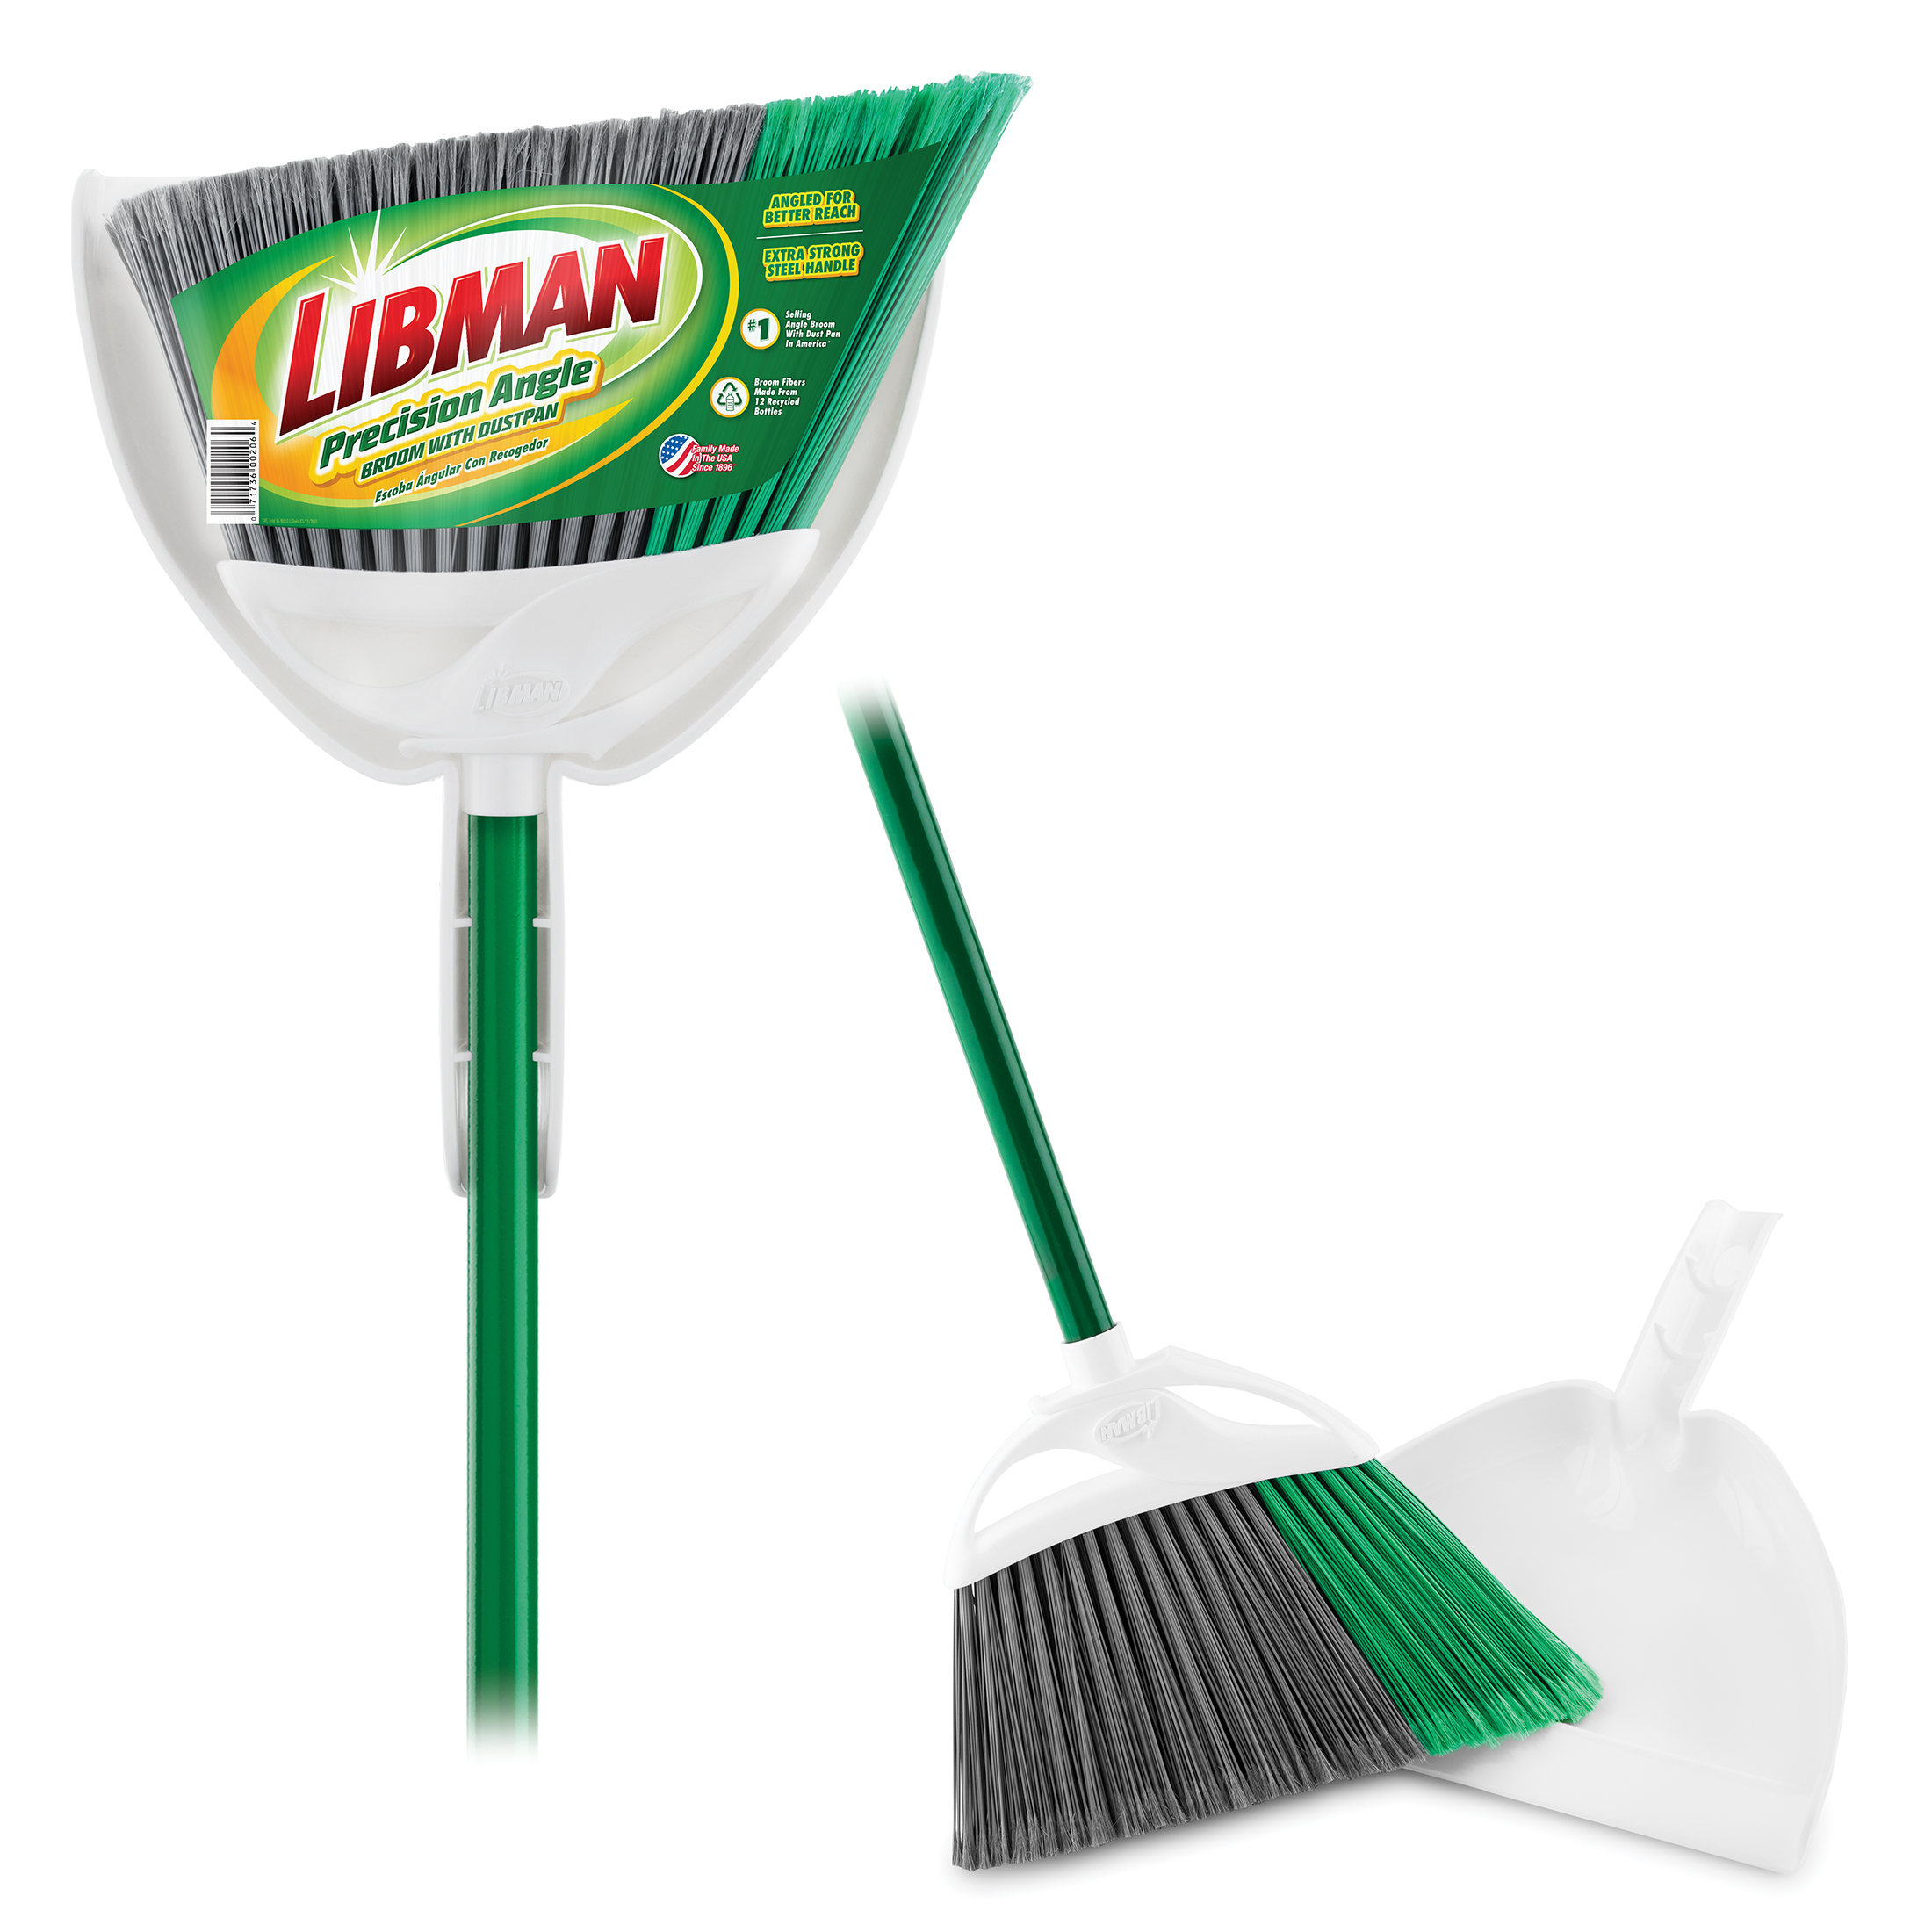 Libman Precision Angle Broom with Dust Pan Green White - image 1 of 7